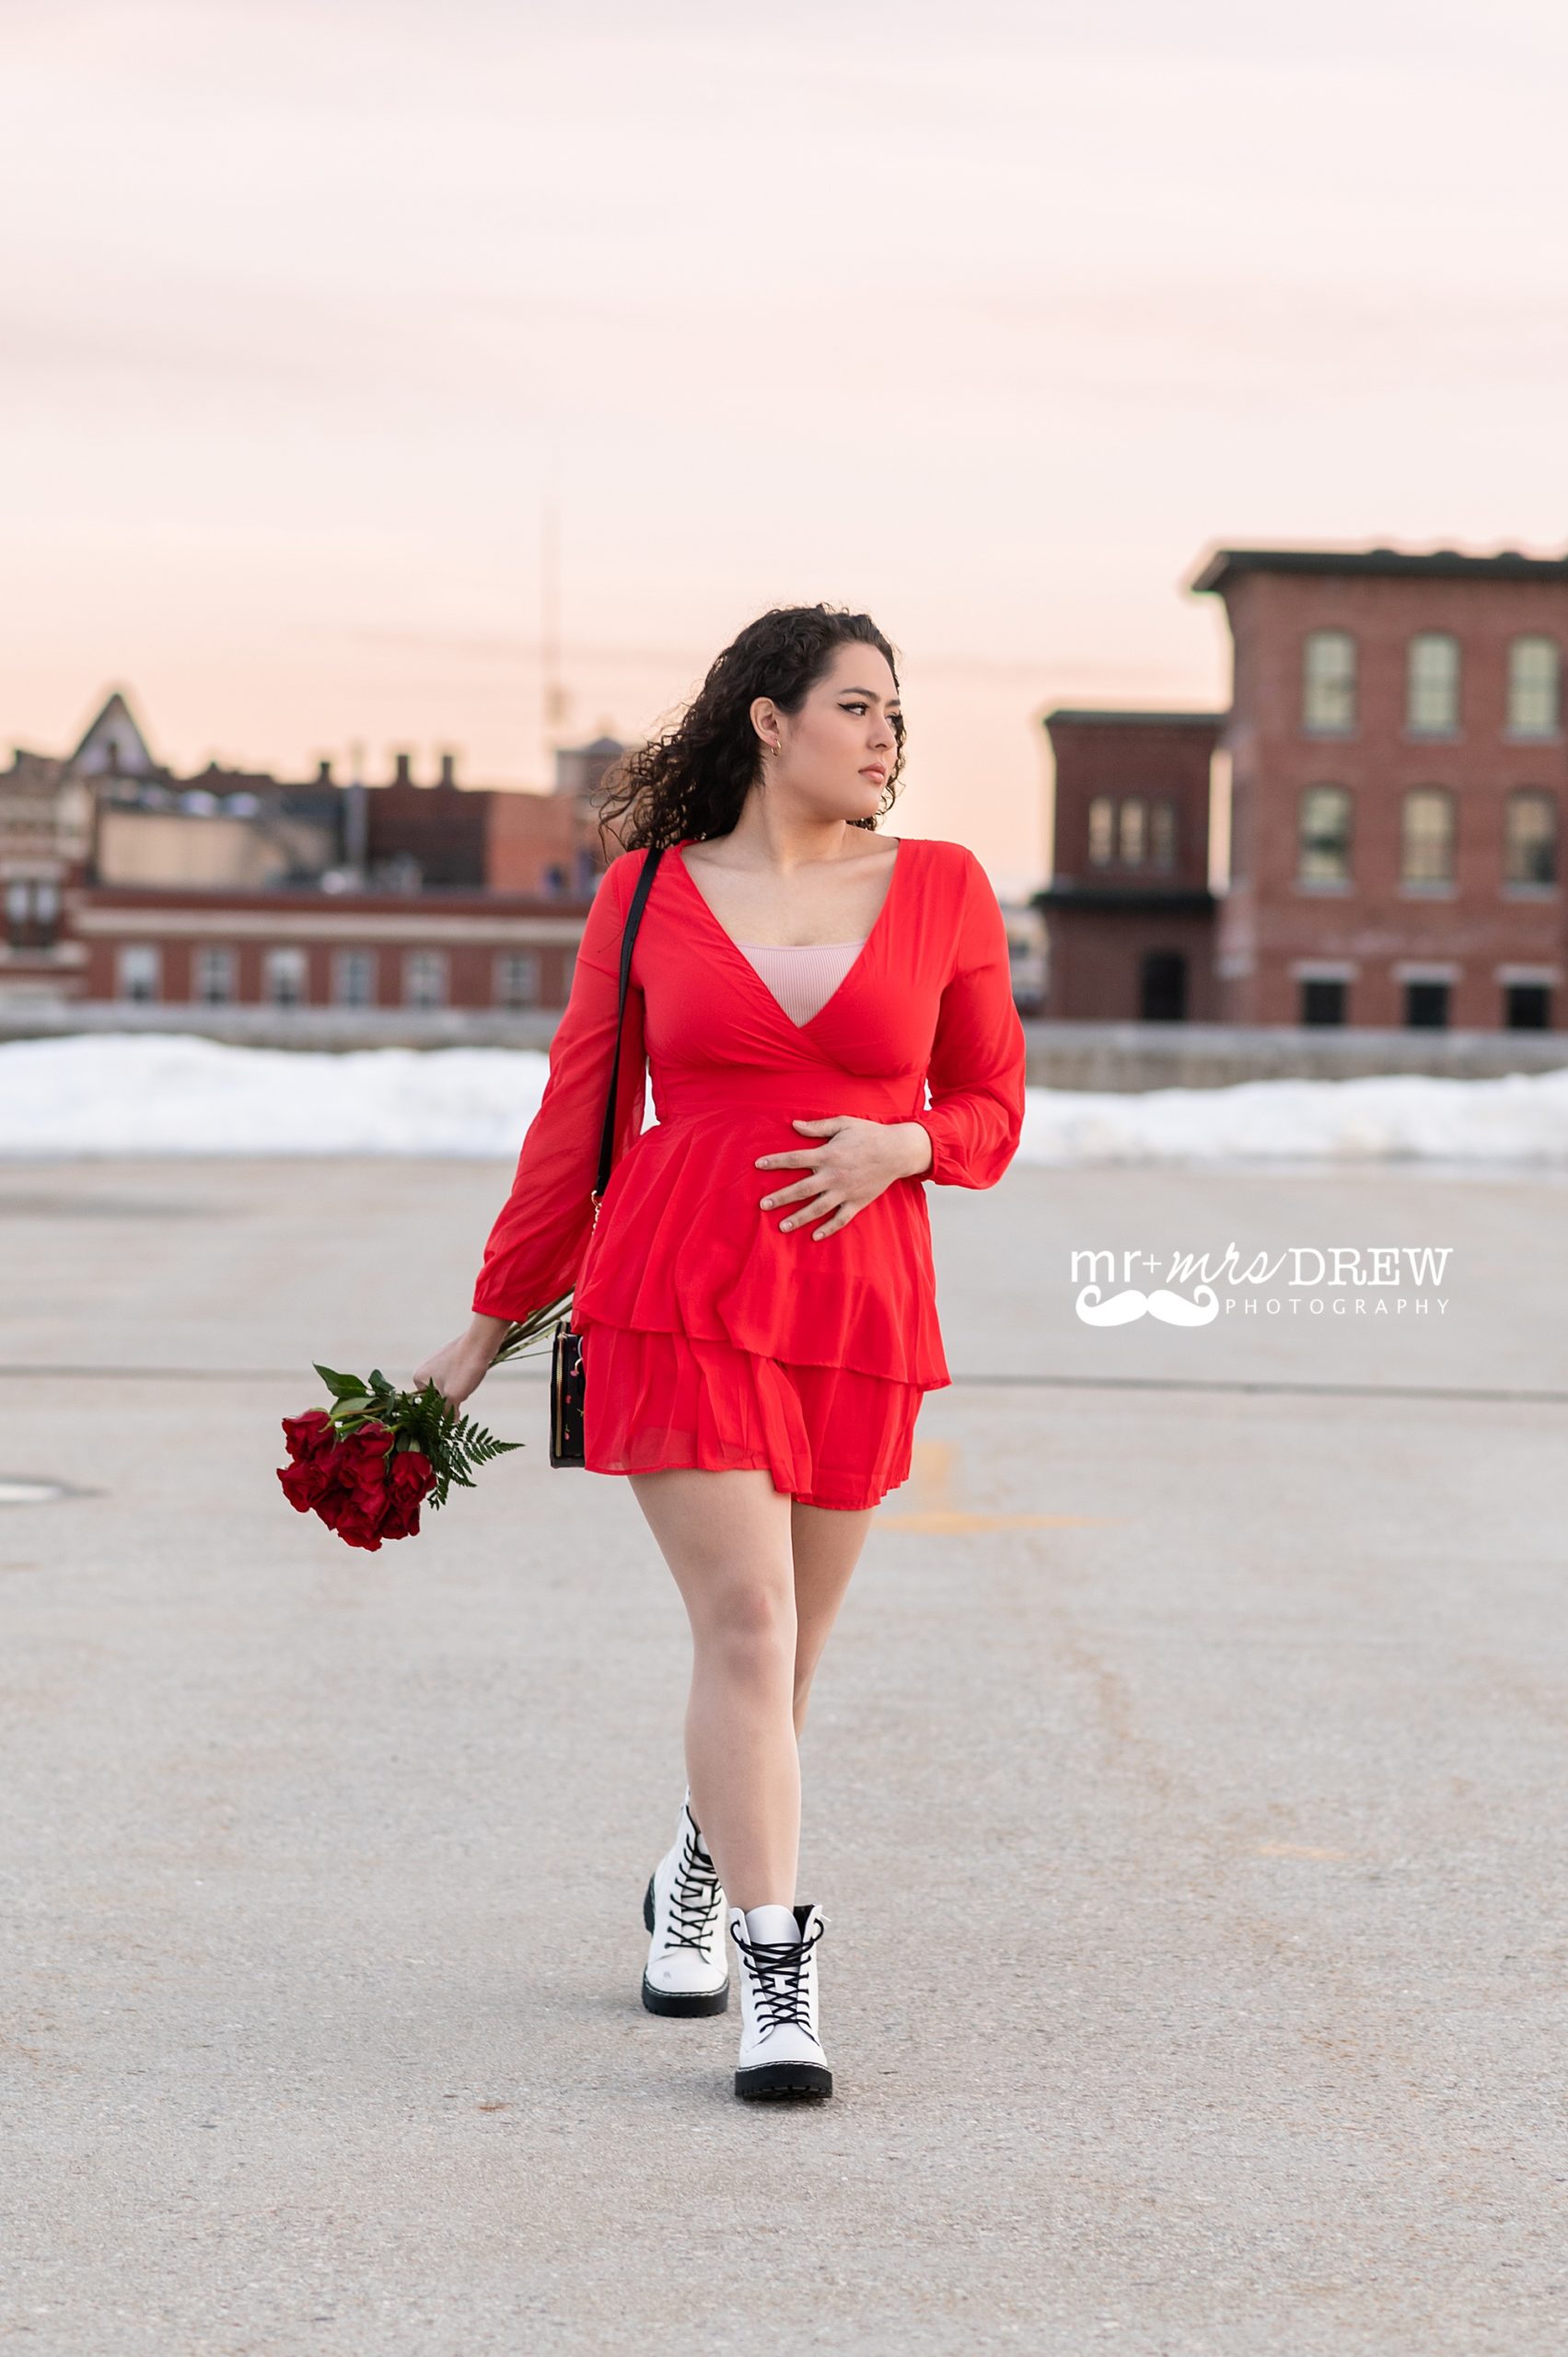 flowers as an accessory for senior photos in Lowell MA